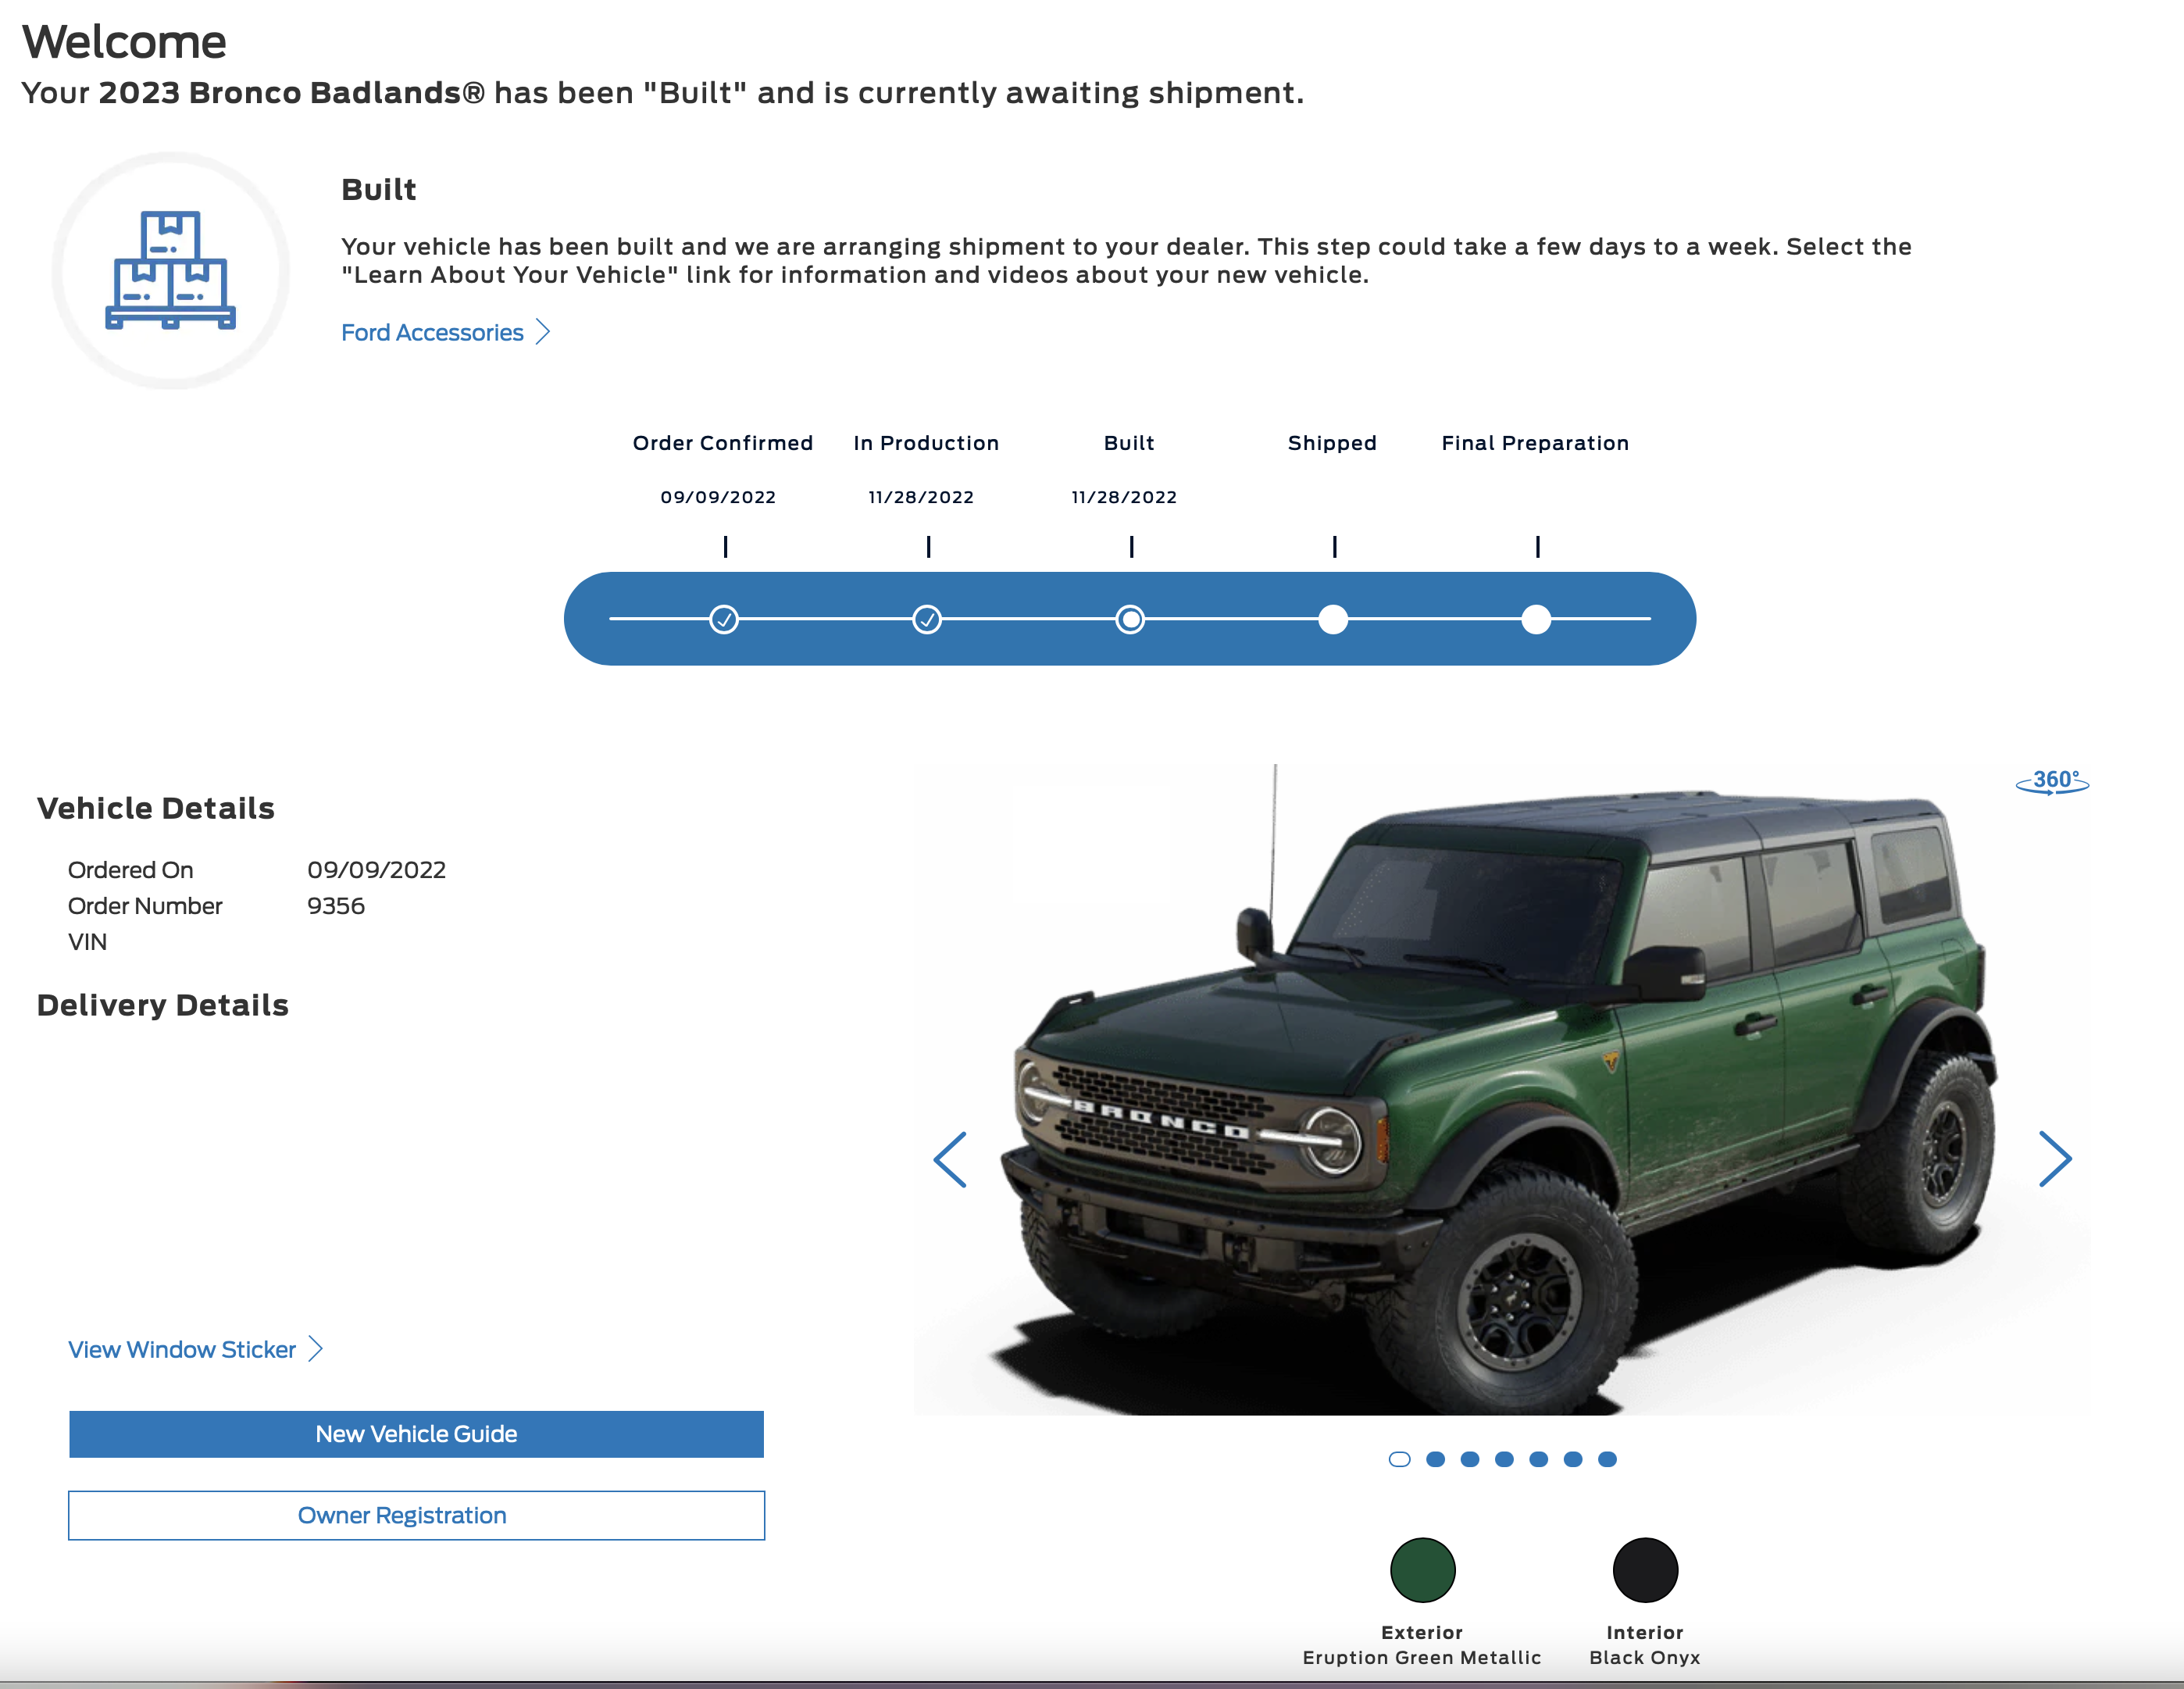 Ford Bronco The End of Ordertrack - Explained Screen Shot 2022-12-12 at 2.16.41 PM